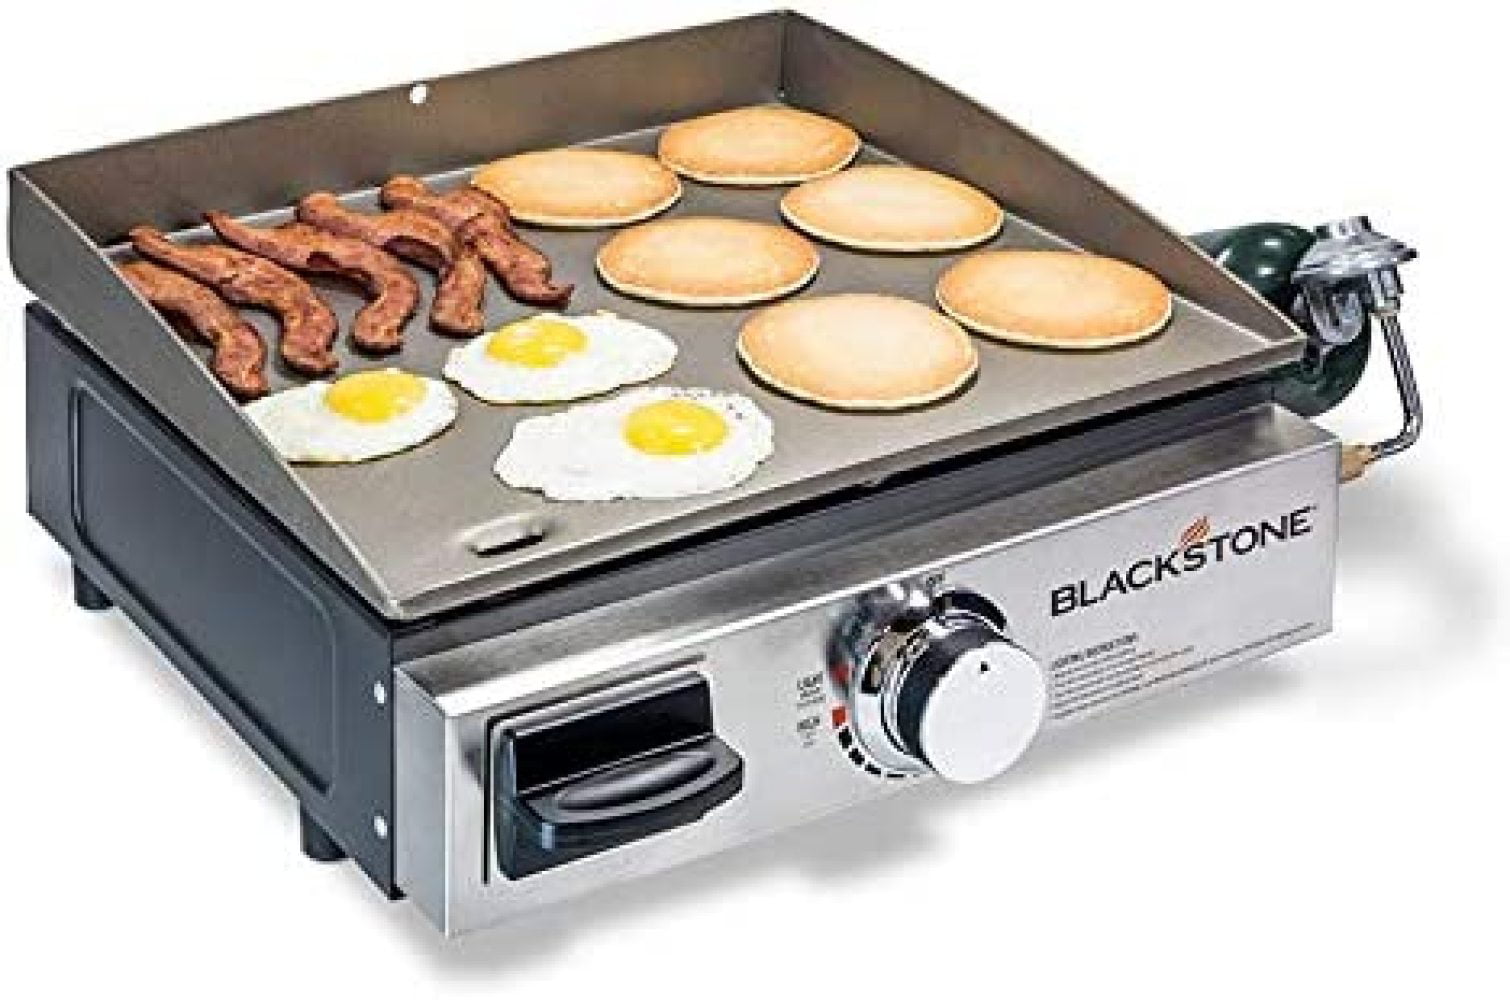 17 Inch Portable Gas Griddle Propane Fueled Stainless Steel & Black Blackstone Table Top Grill for Outdoor Cooking While Camping Tailgating or Picnicking 